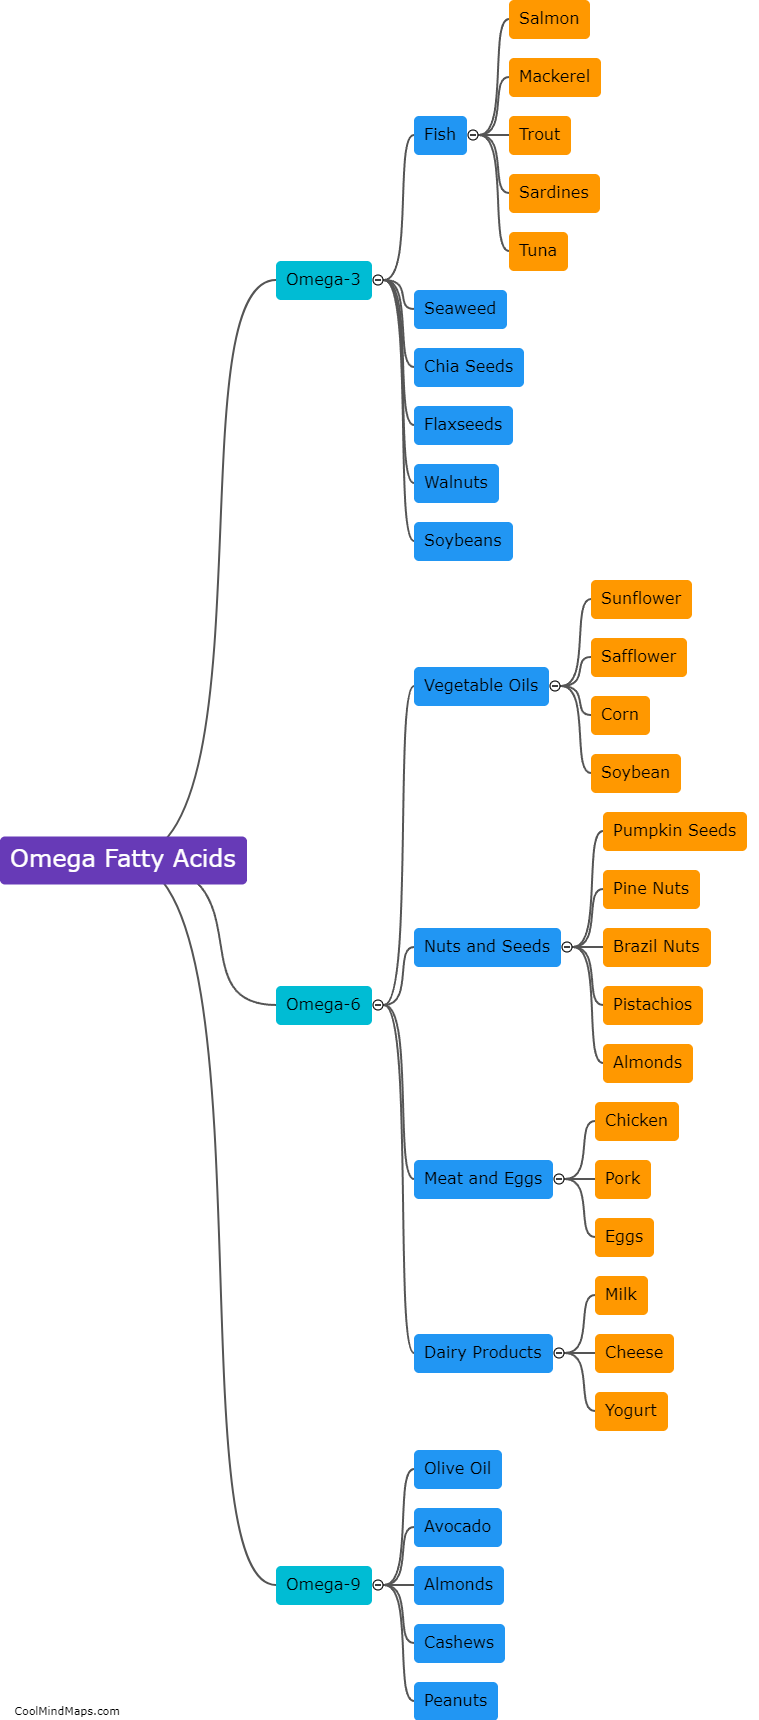 What are the dietary sources of omega fatty acids?